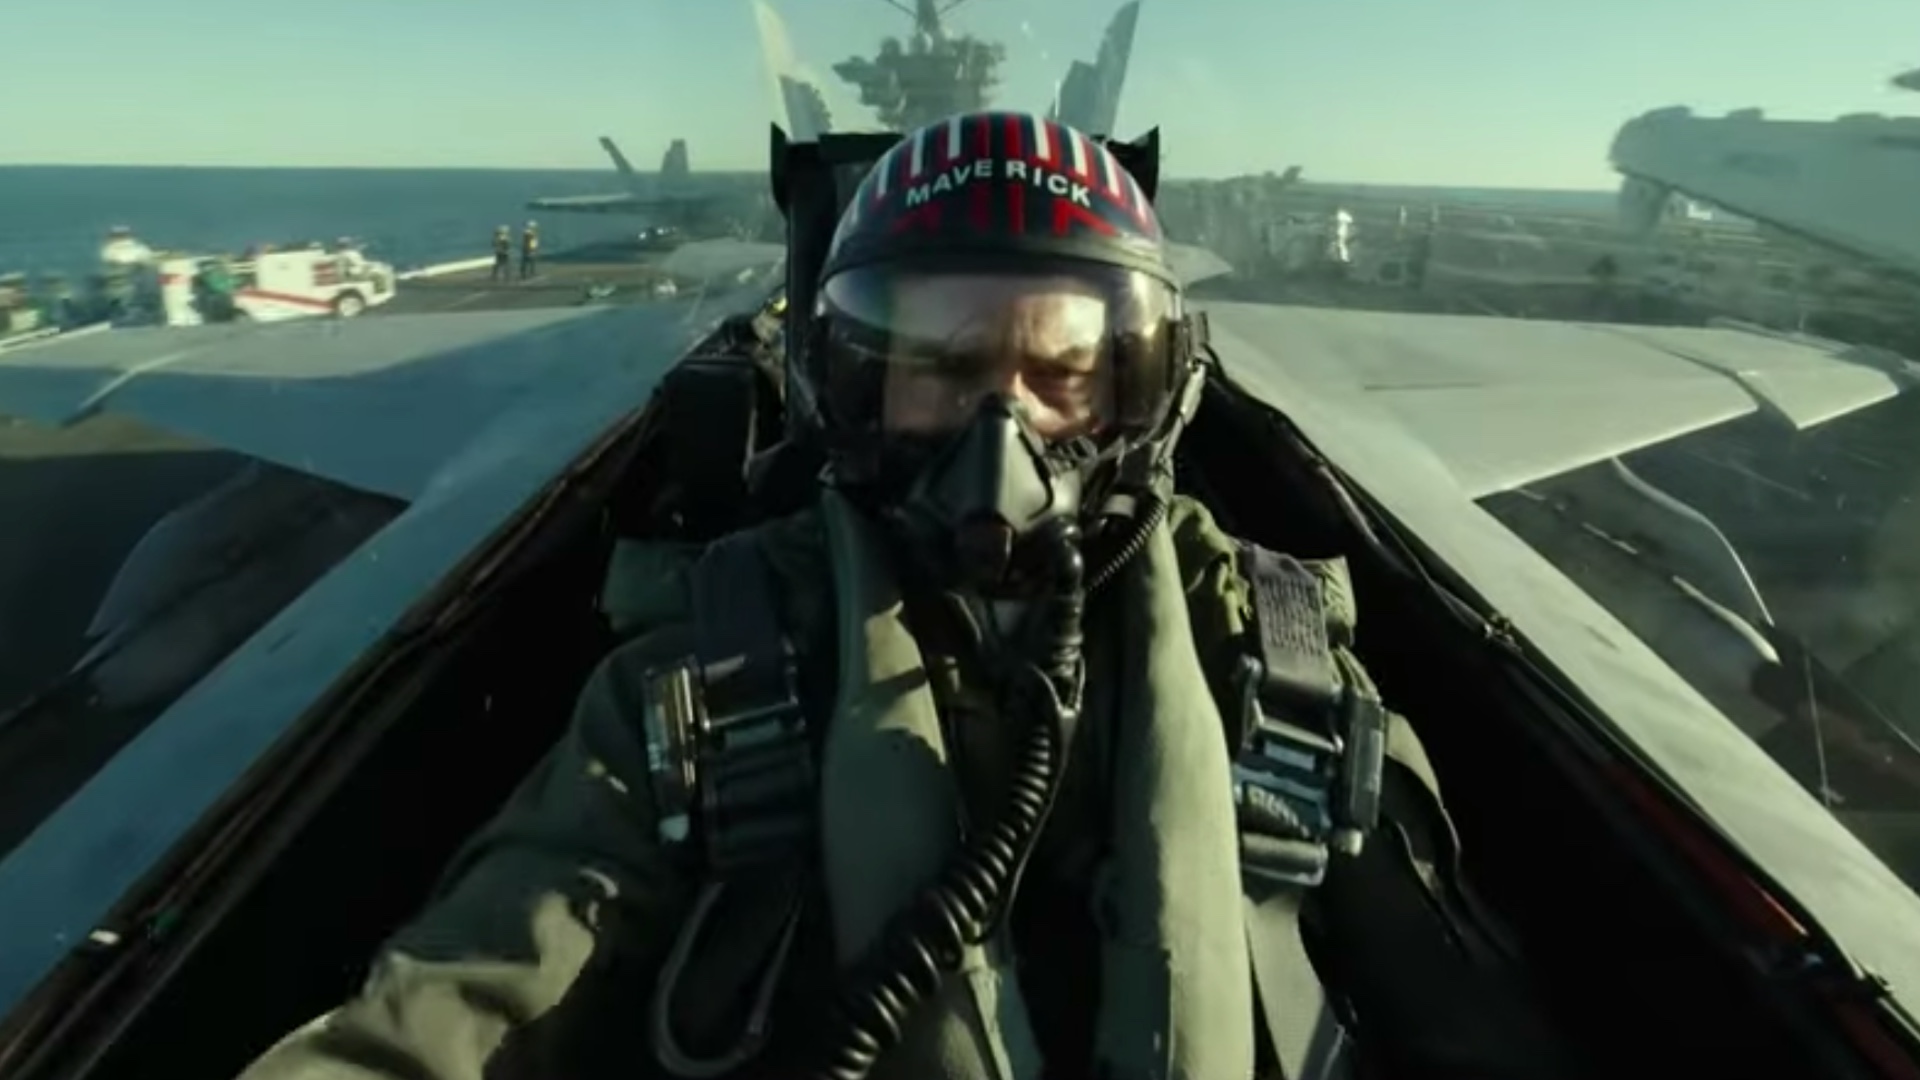 Get Your First Look At Top Gun Maverick In This Brand New Trailer Geek Outpost